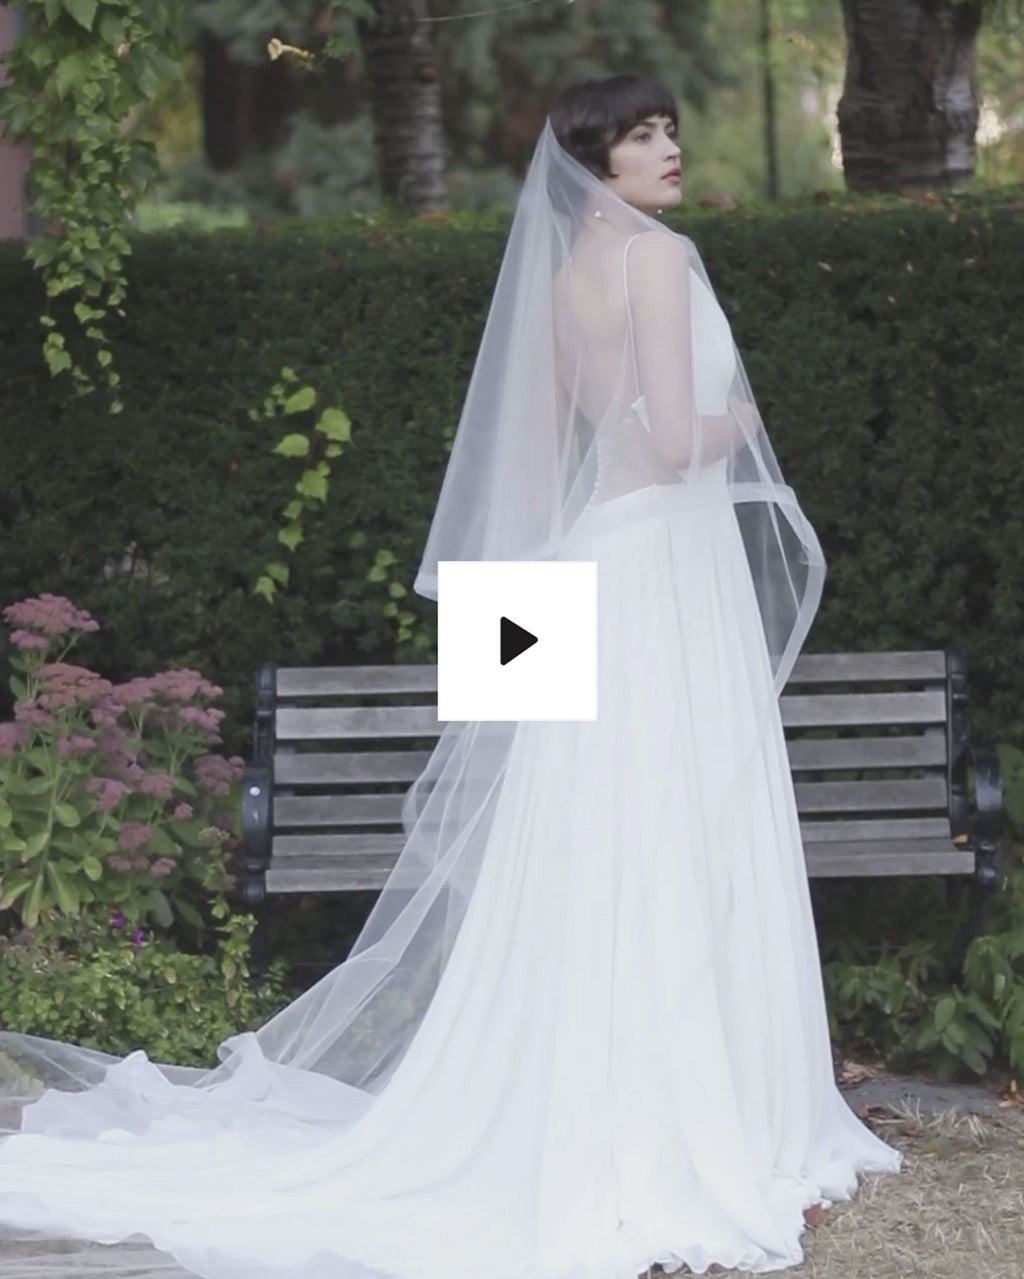 A wears the Zahra two layer veil in cathedral length in front of a flowering shrub.